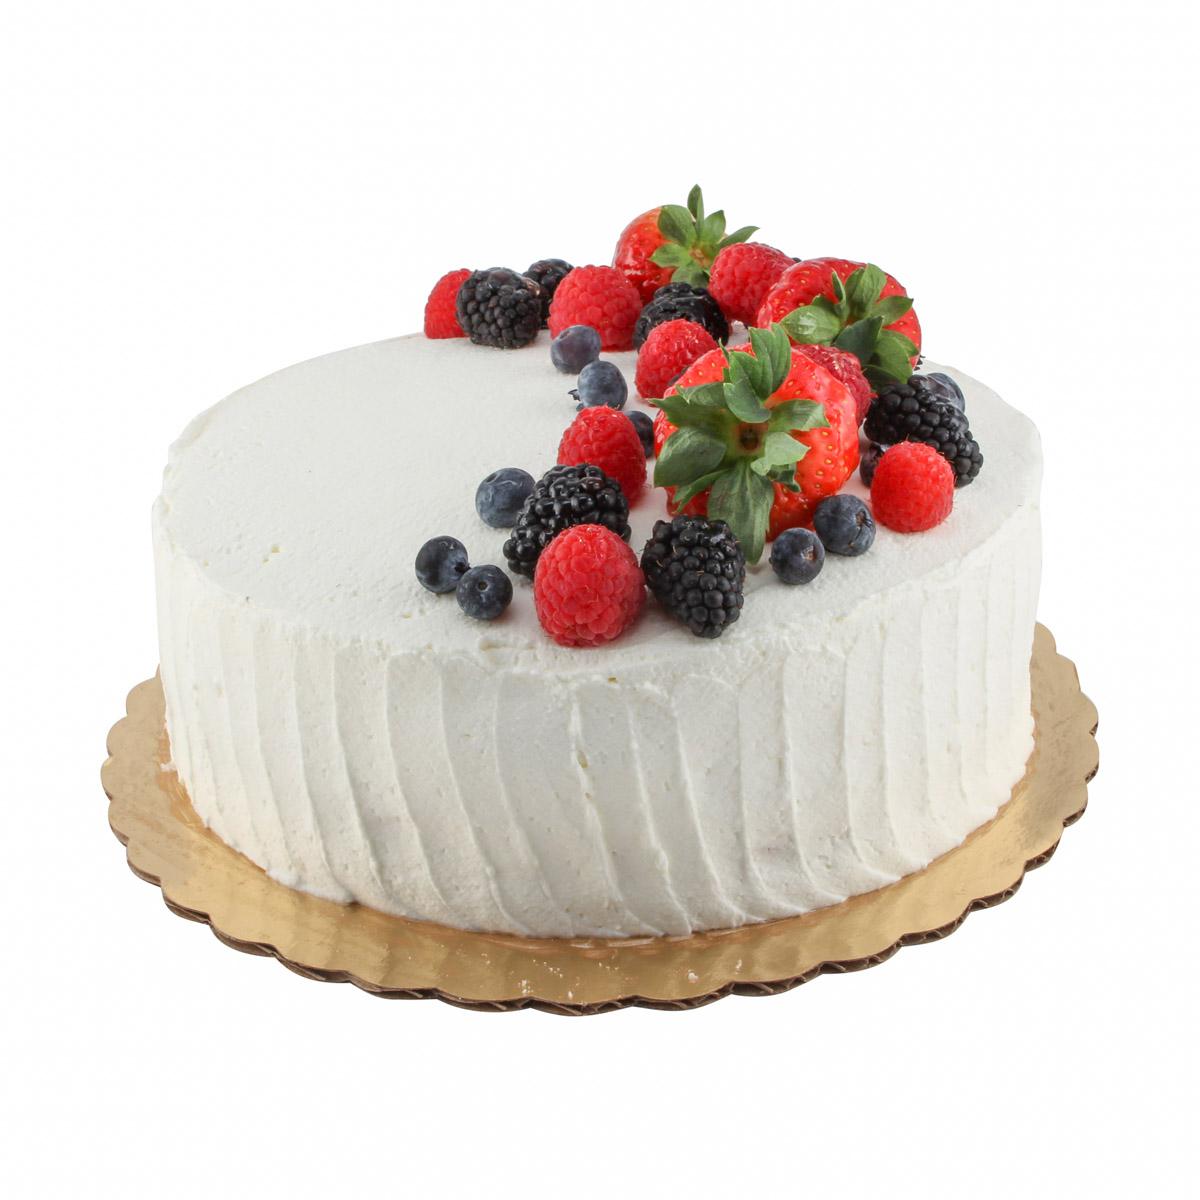 Whole Foods Large Berry Chantilly Cake for $18